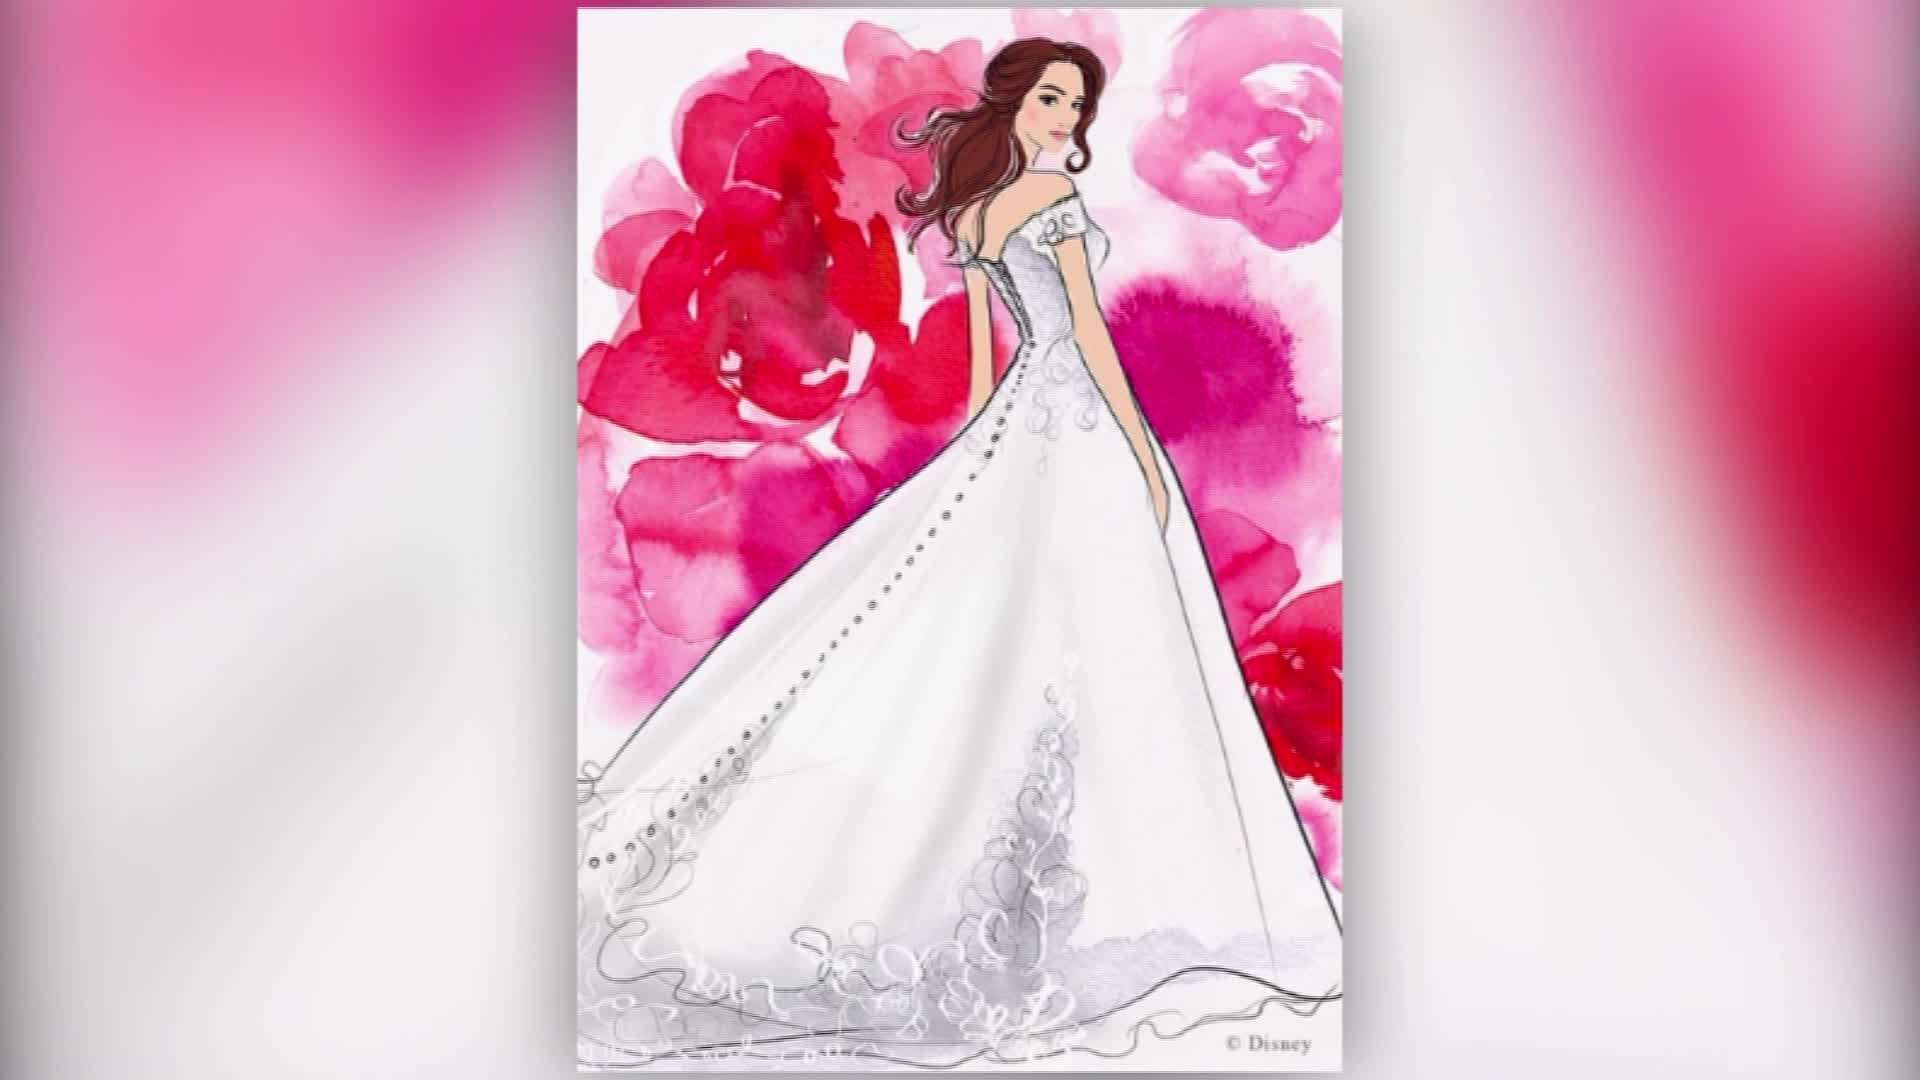 That fairy tale wedding might be possible after all. Disney is launching a new line of princess-inspired wedding gowns.
'Allure Bridals' is designing 16 dresses reflecting the personality and tastes of characters like Tiana, Ariel, Jasmine, Pocahontas, and Cinderella.
All of the dresses will be unveiled this April during New York bridal fashion week. After that, they're set to go on sale at Kleinfeld Bridal Stores in New York. There is no word on whether Disney will offer tuxedos for those real-world Prince Charmings.